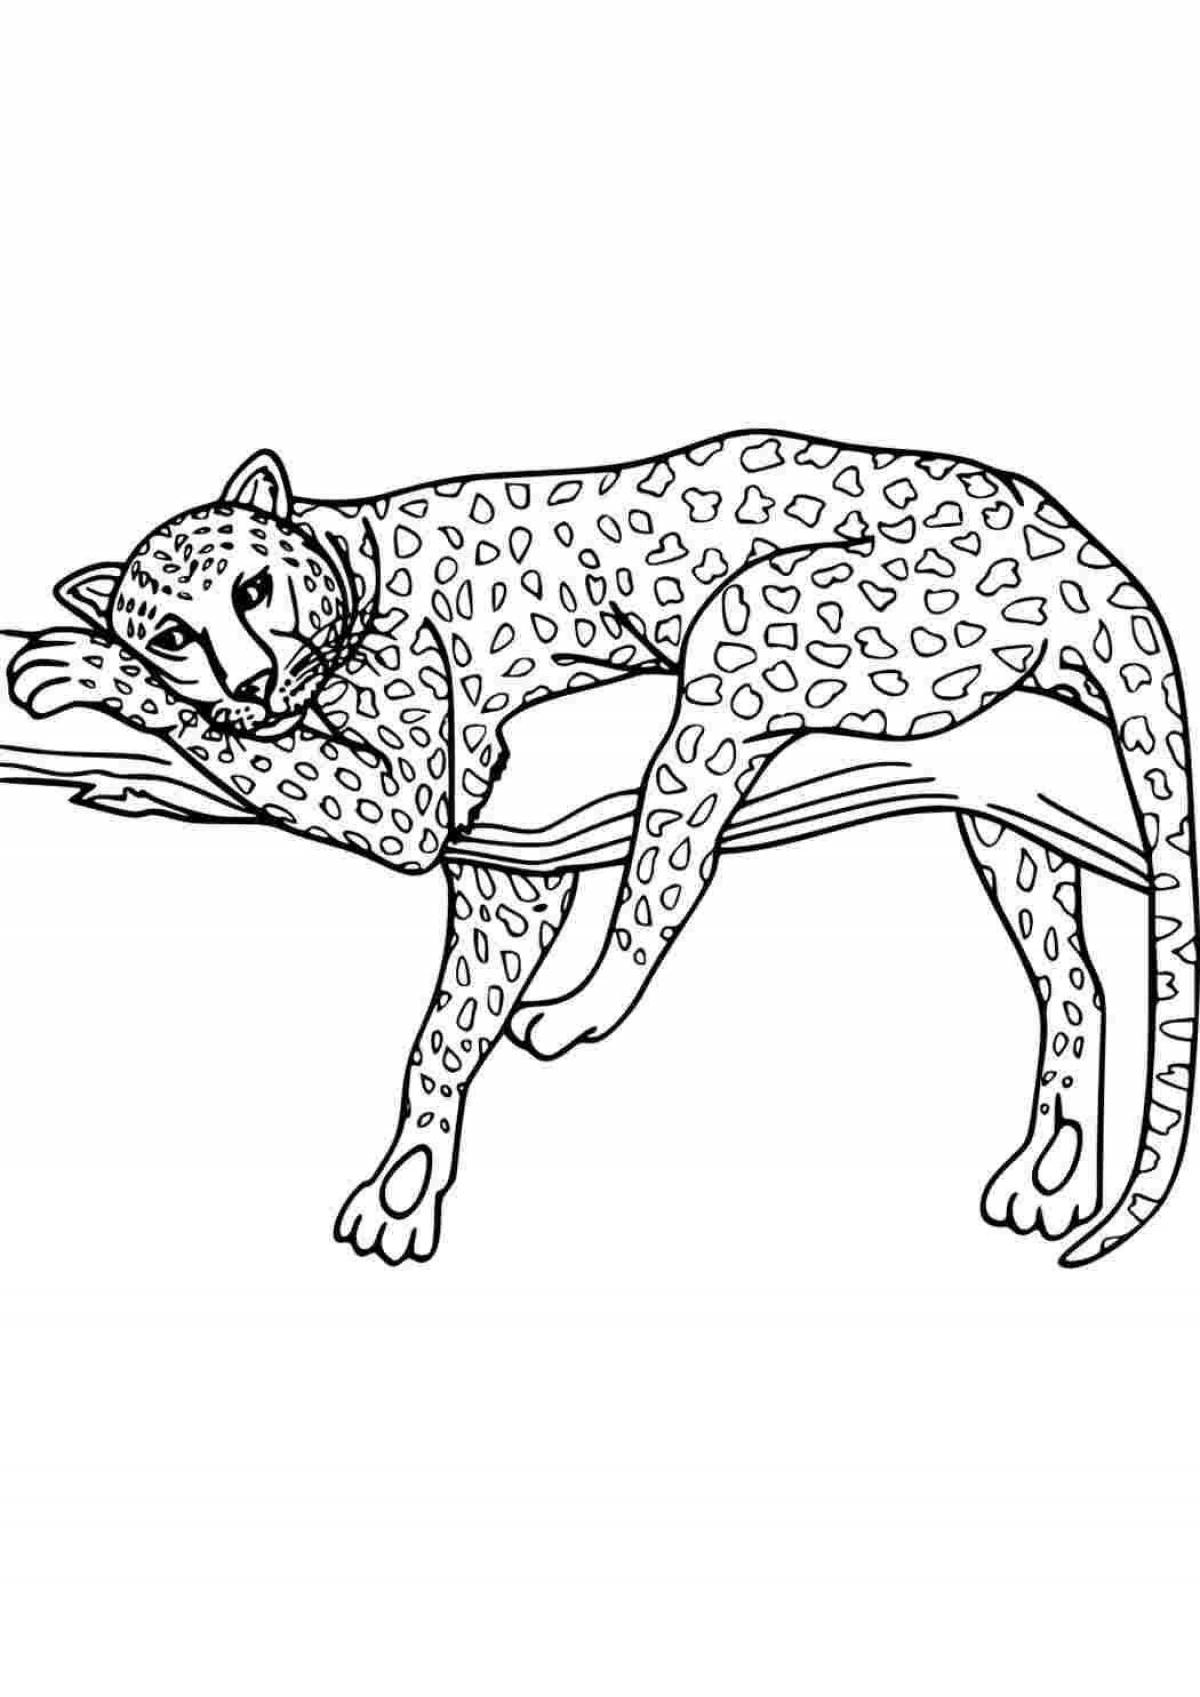 Great panther coloring book